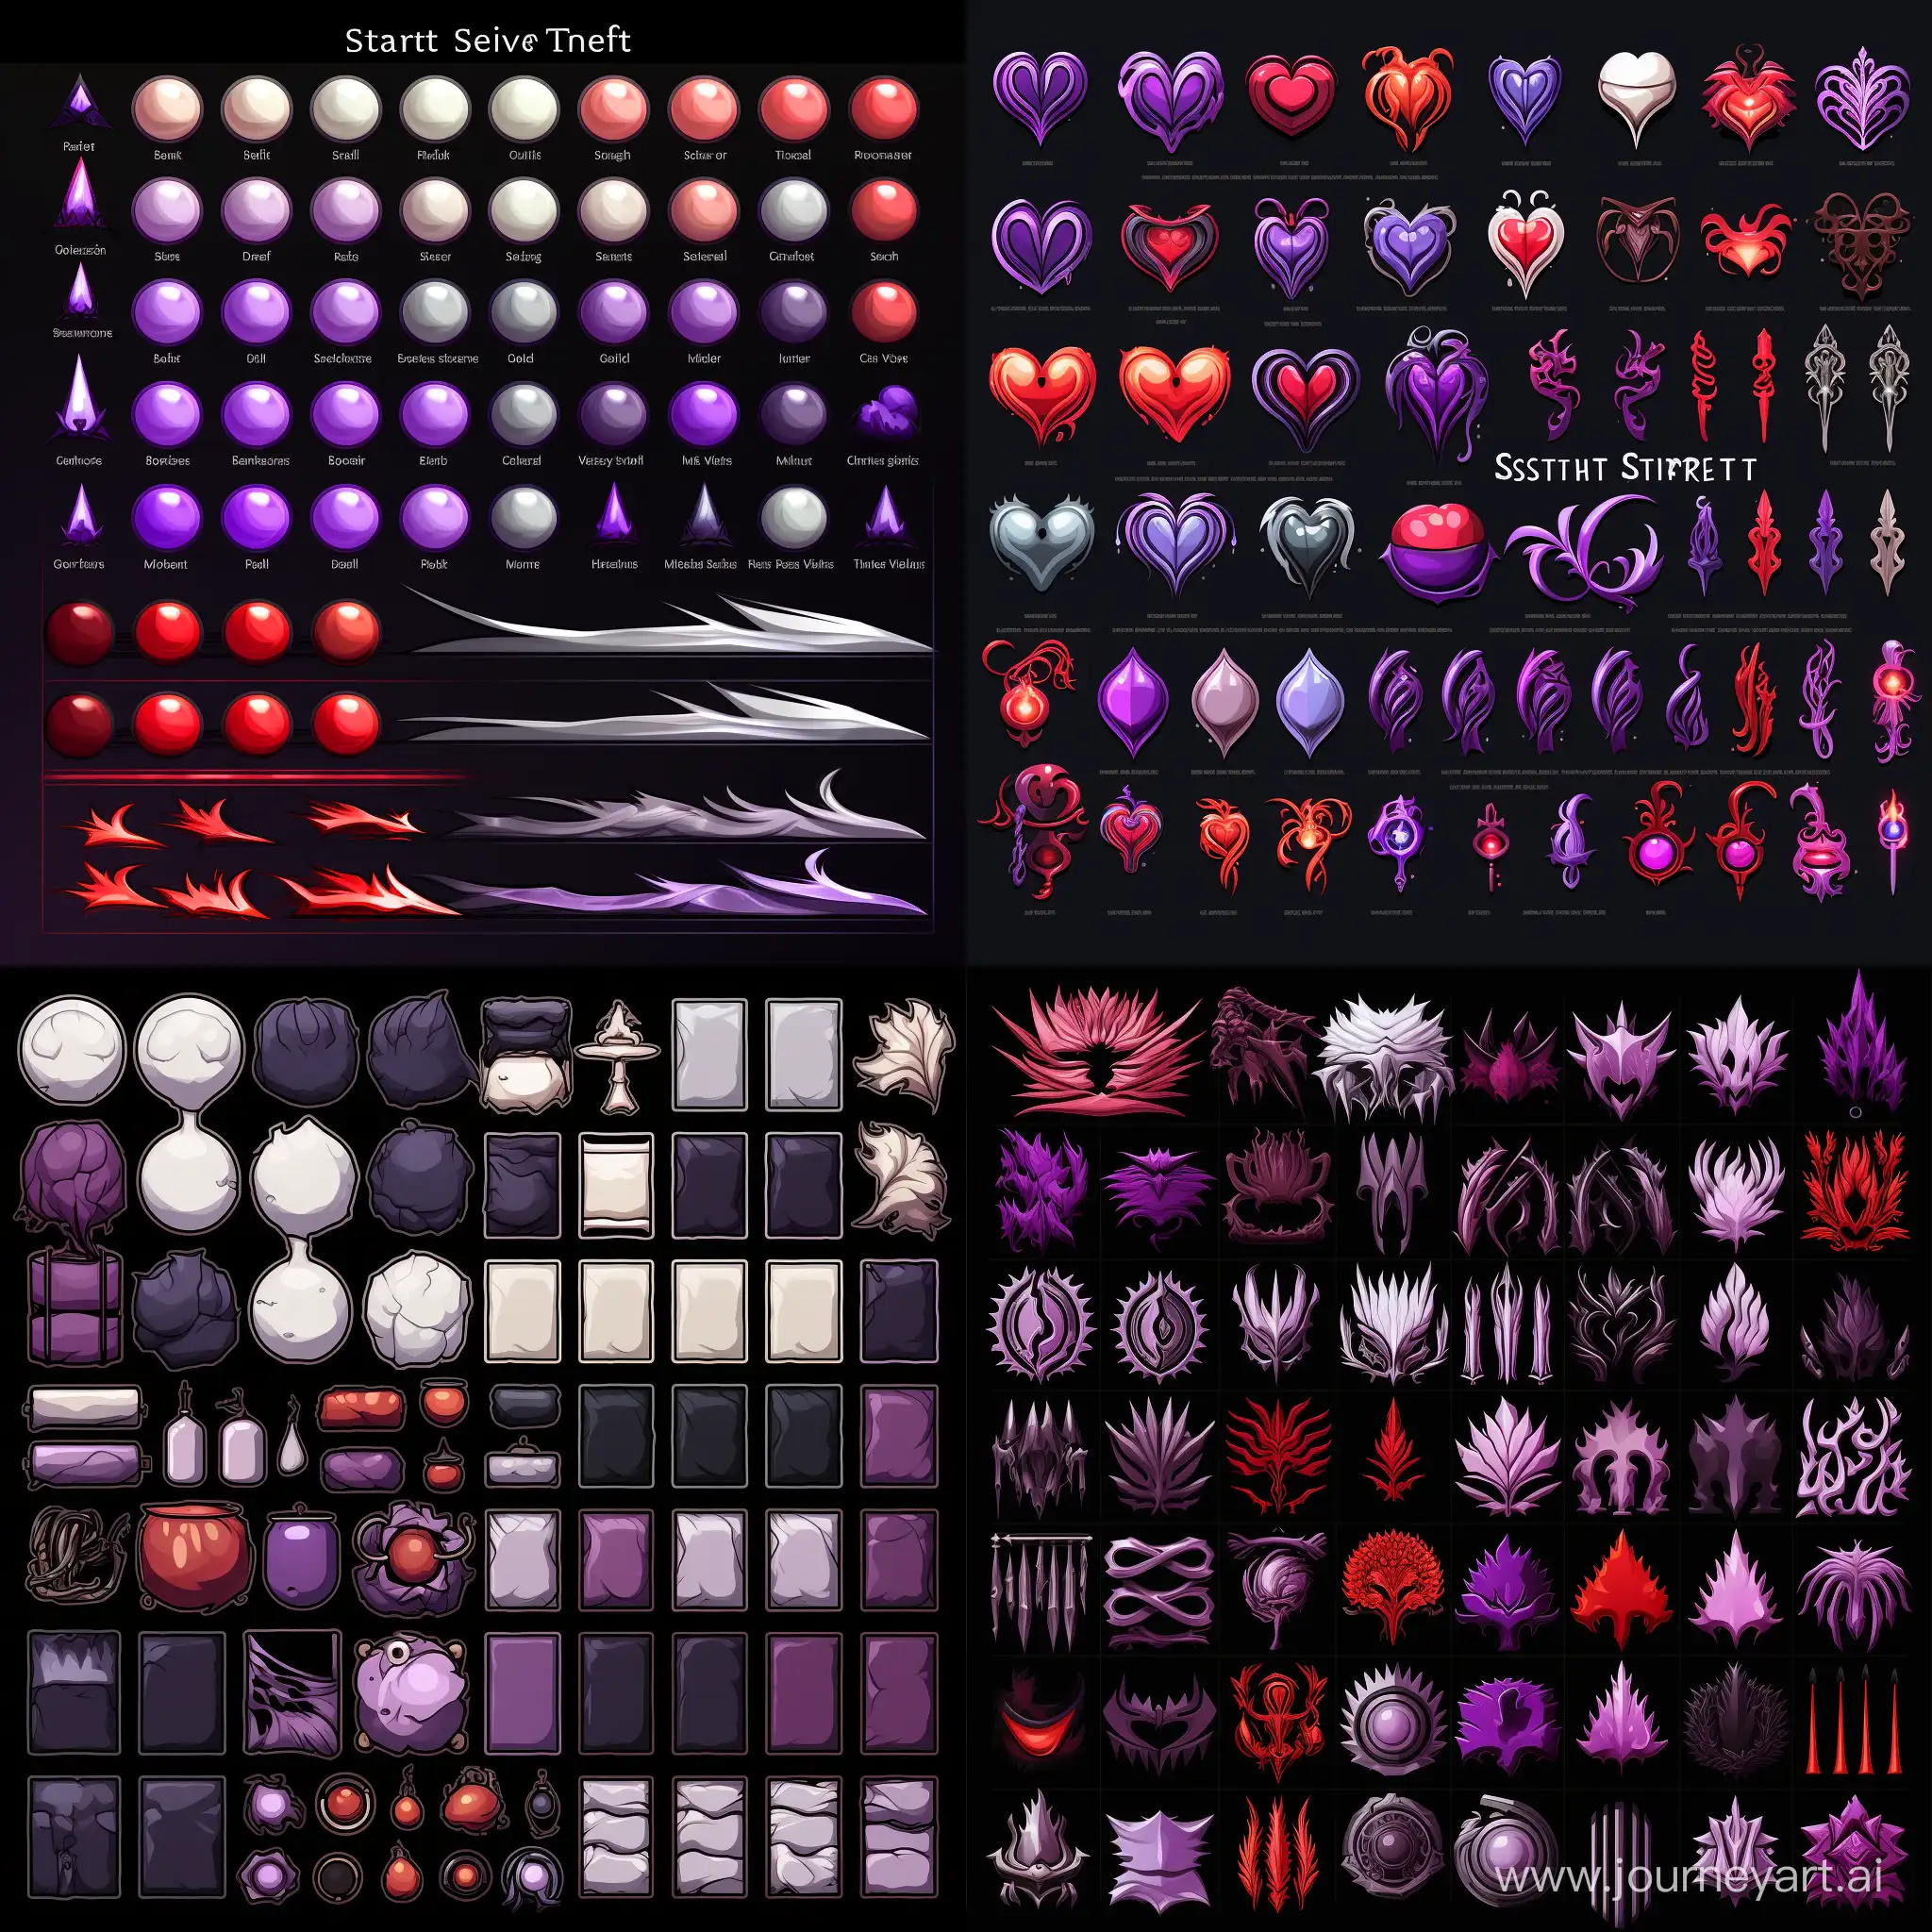 Diverse-Item-Spritesheet-in-Striking-Black-Red-White-and-Purple-Colors